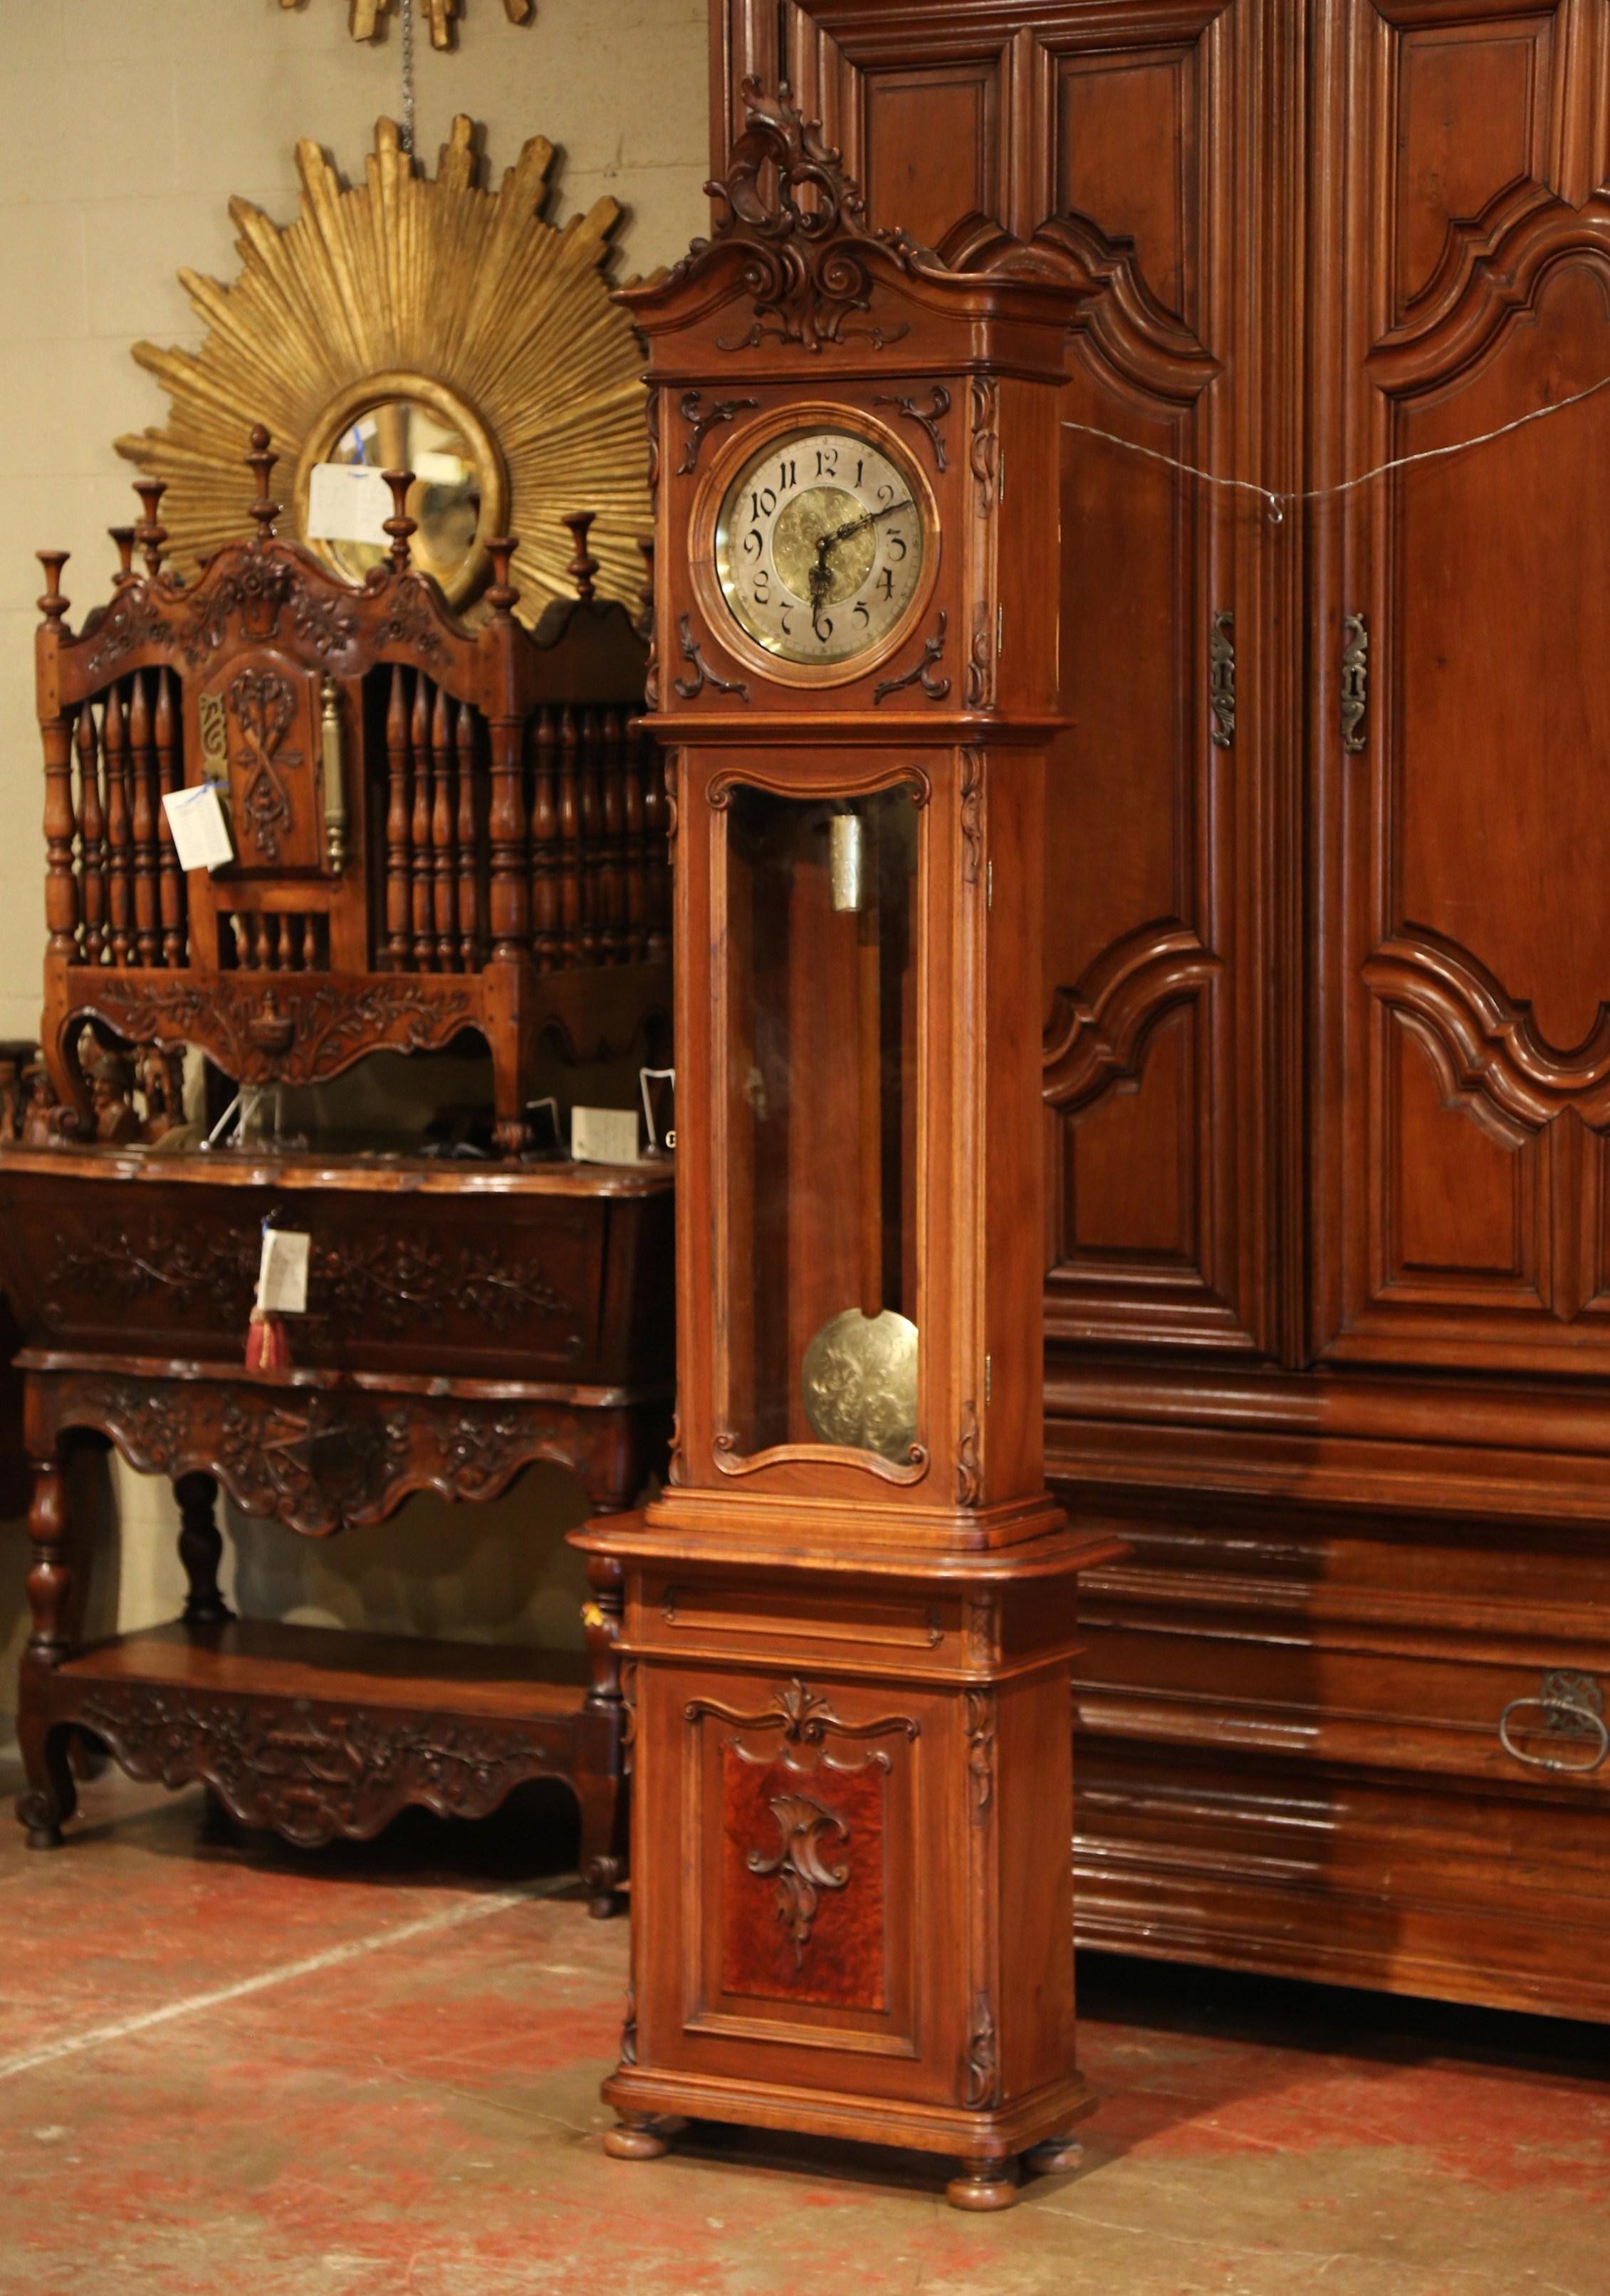 19th Century French Louis XV Carved Walnut Grandfather Clock from Lyon 1